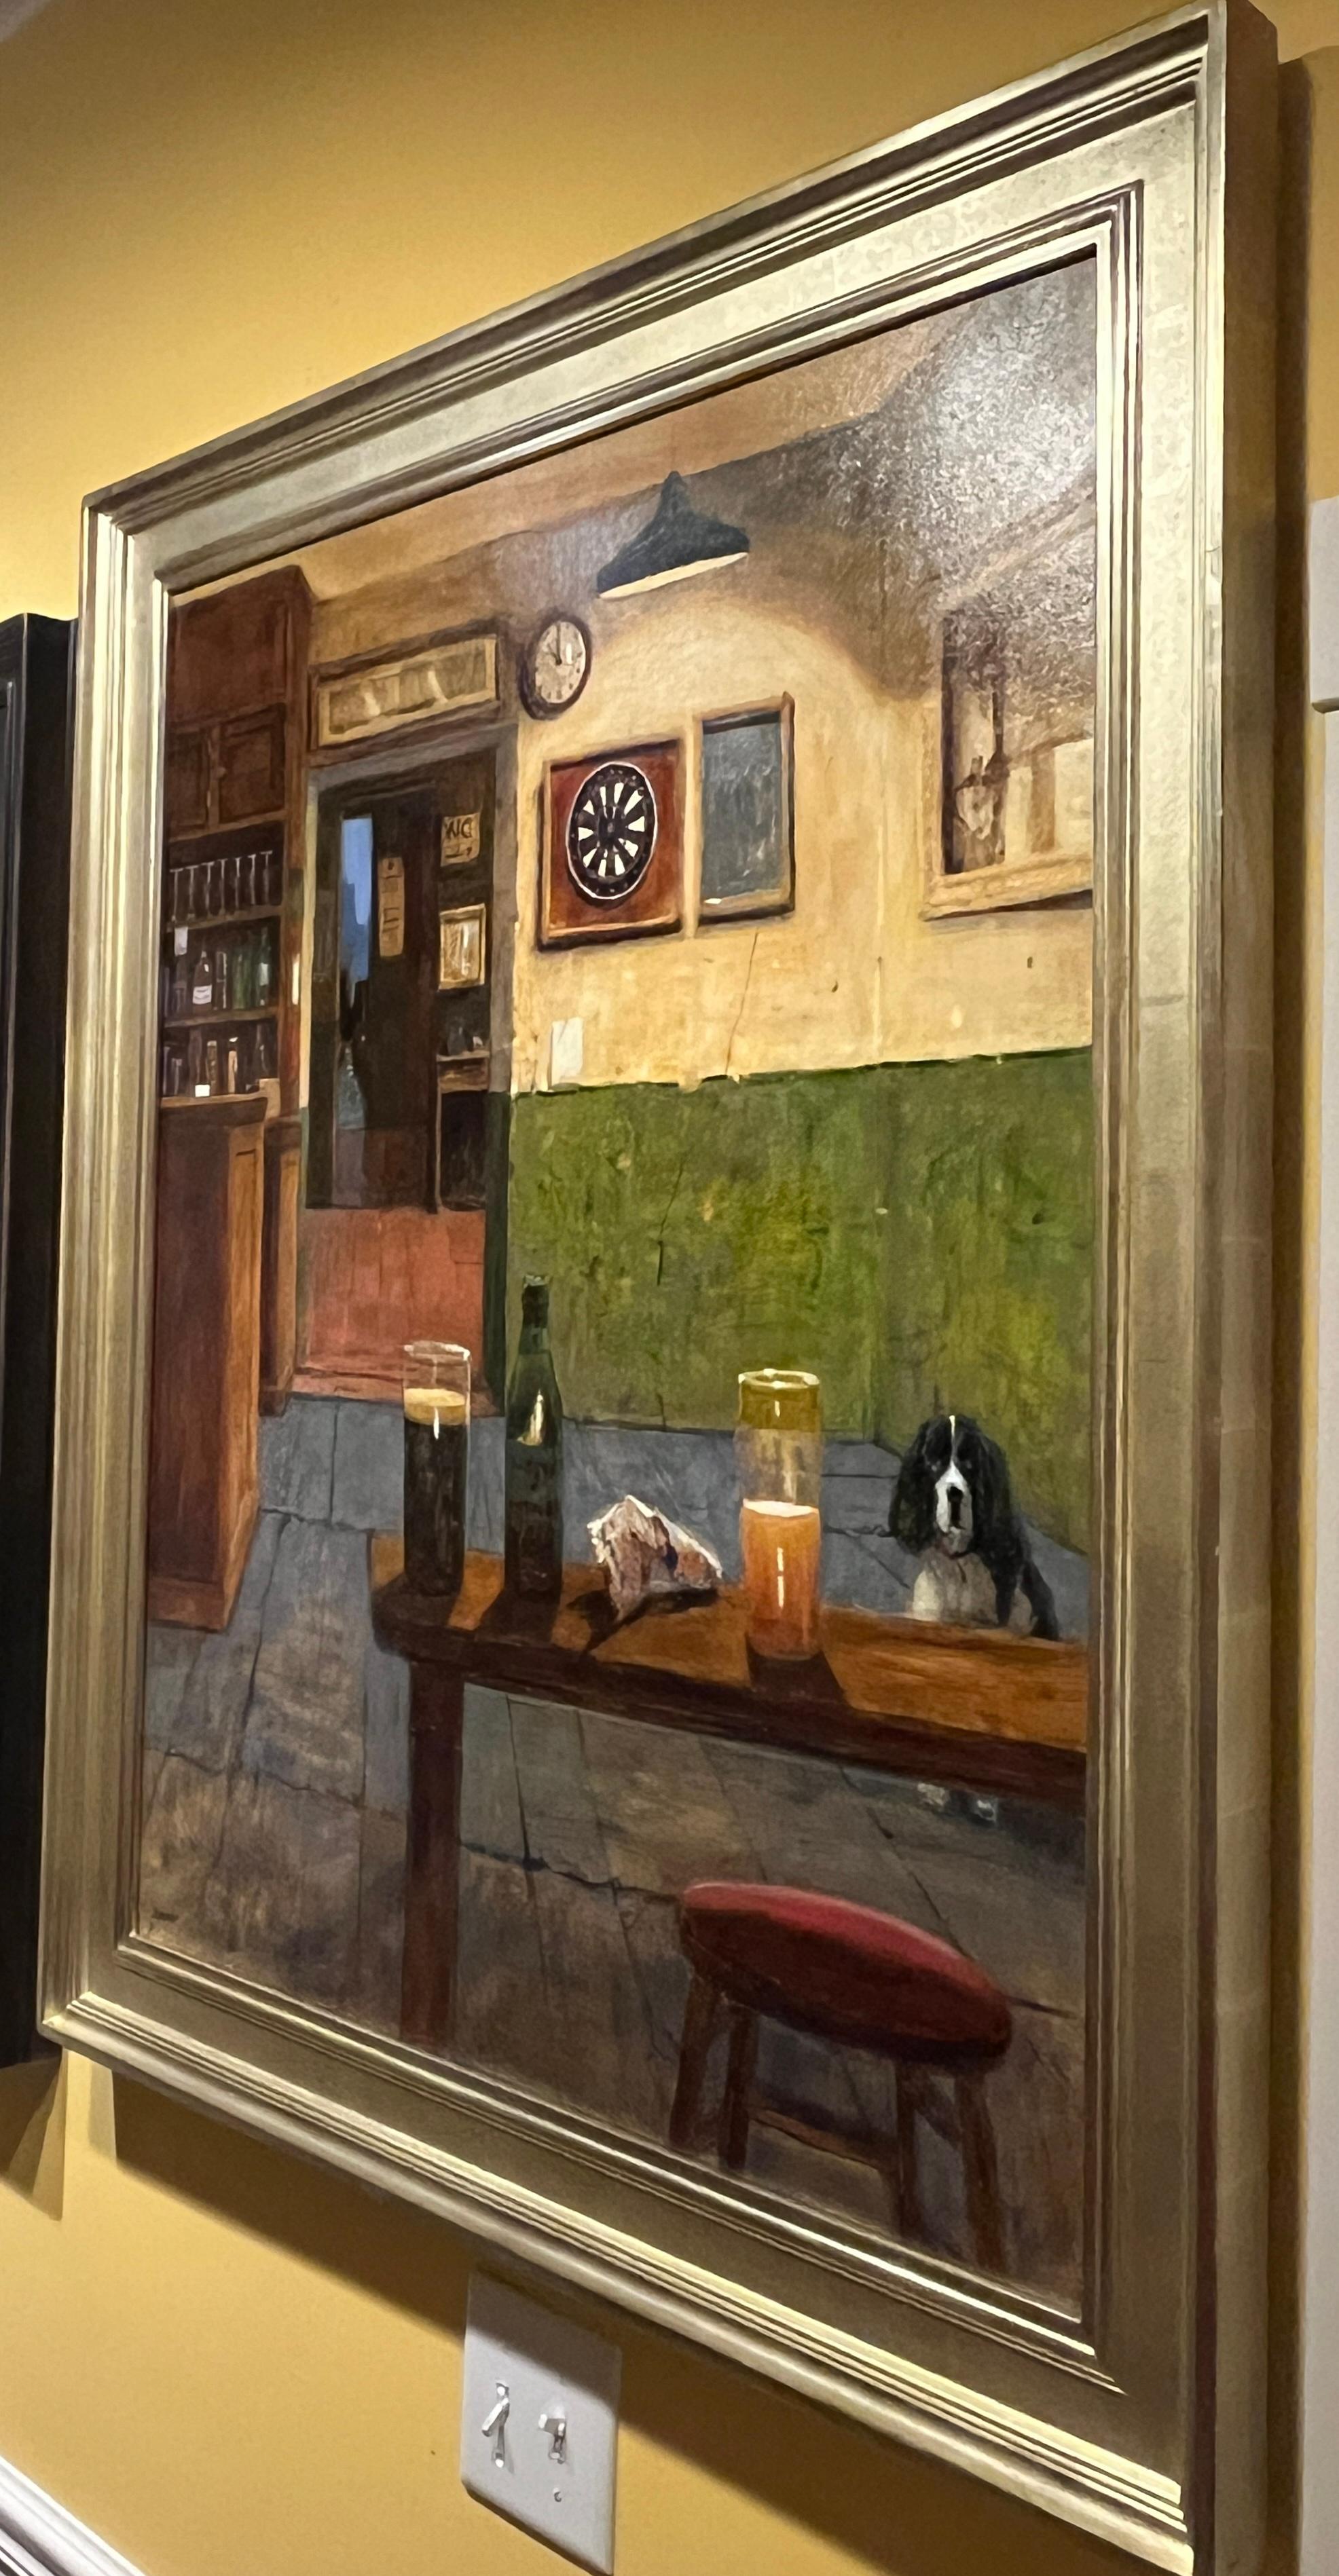 A Country Pub - Painting by Donald Jurney